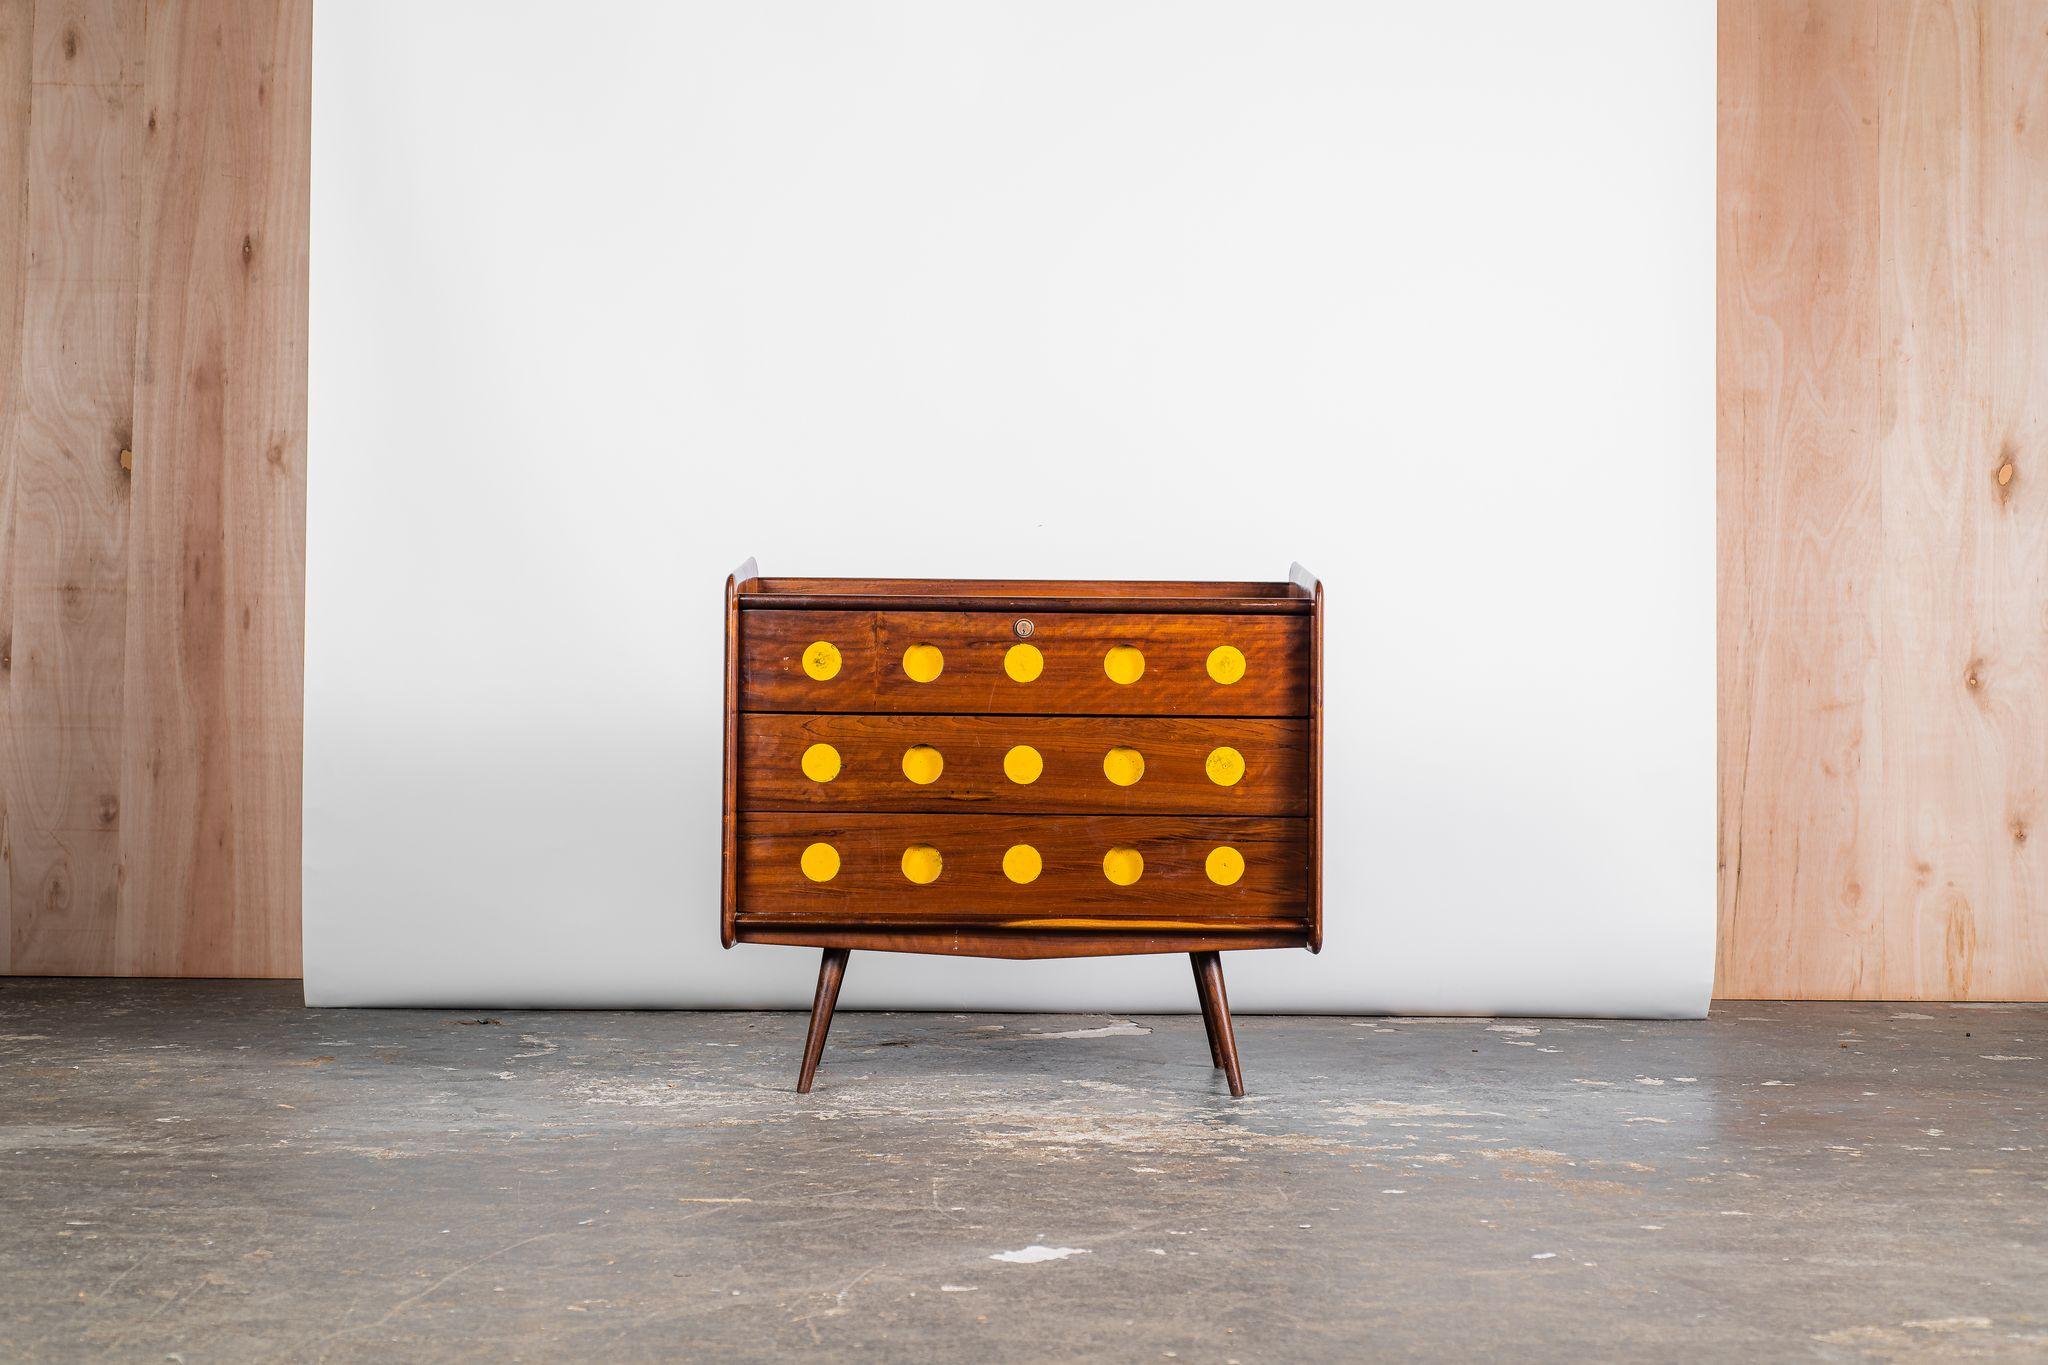 This three-drawer dresser crafted from solid hardwood adorned with vibrant yellow circle motifs exemplifies the whimsical furniture creations by Móveis Cimo during the 50s. Originally conceived as part of a youth's room collection, this dresser